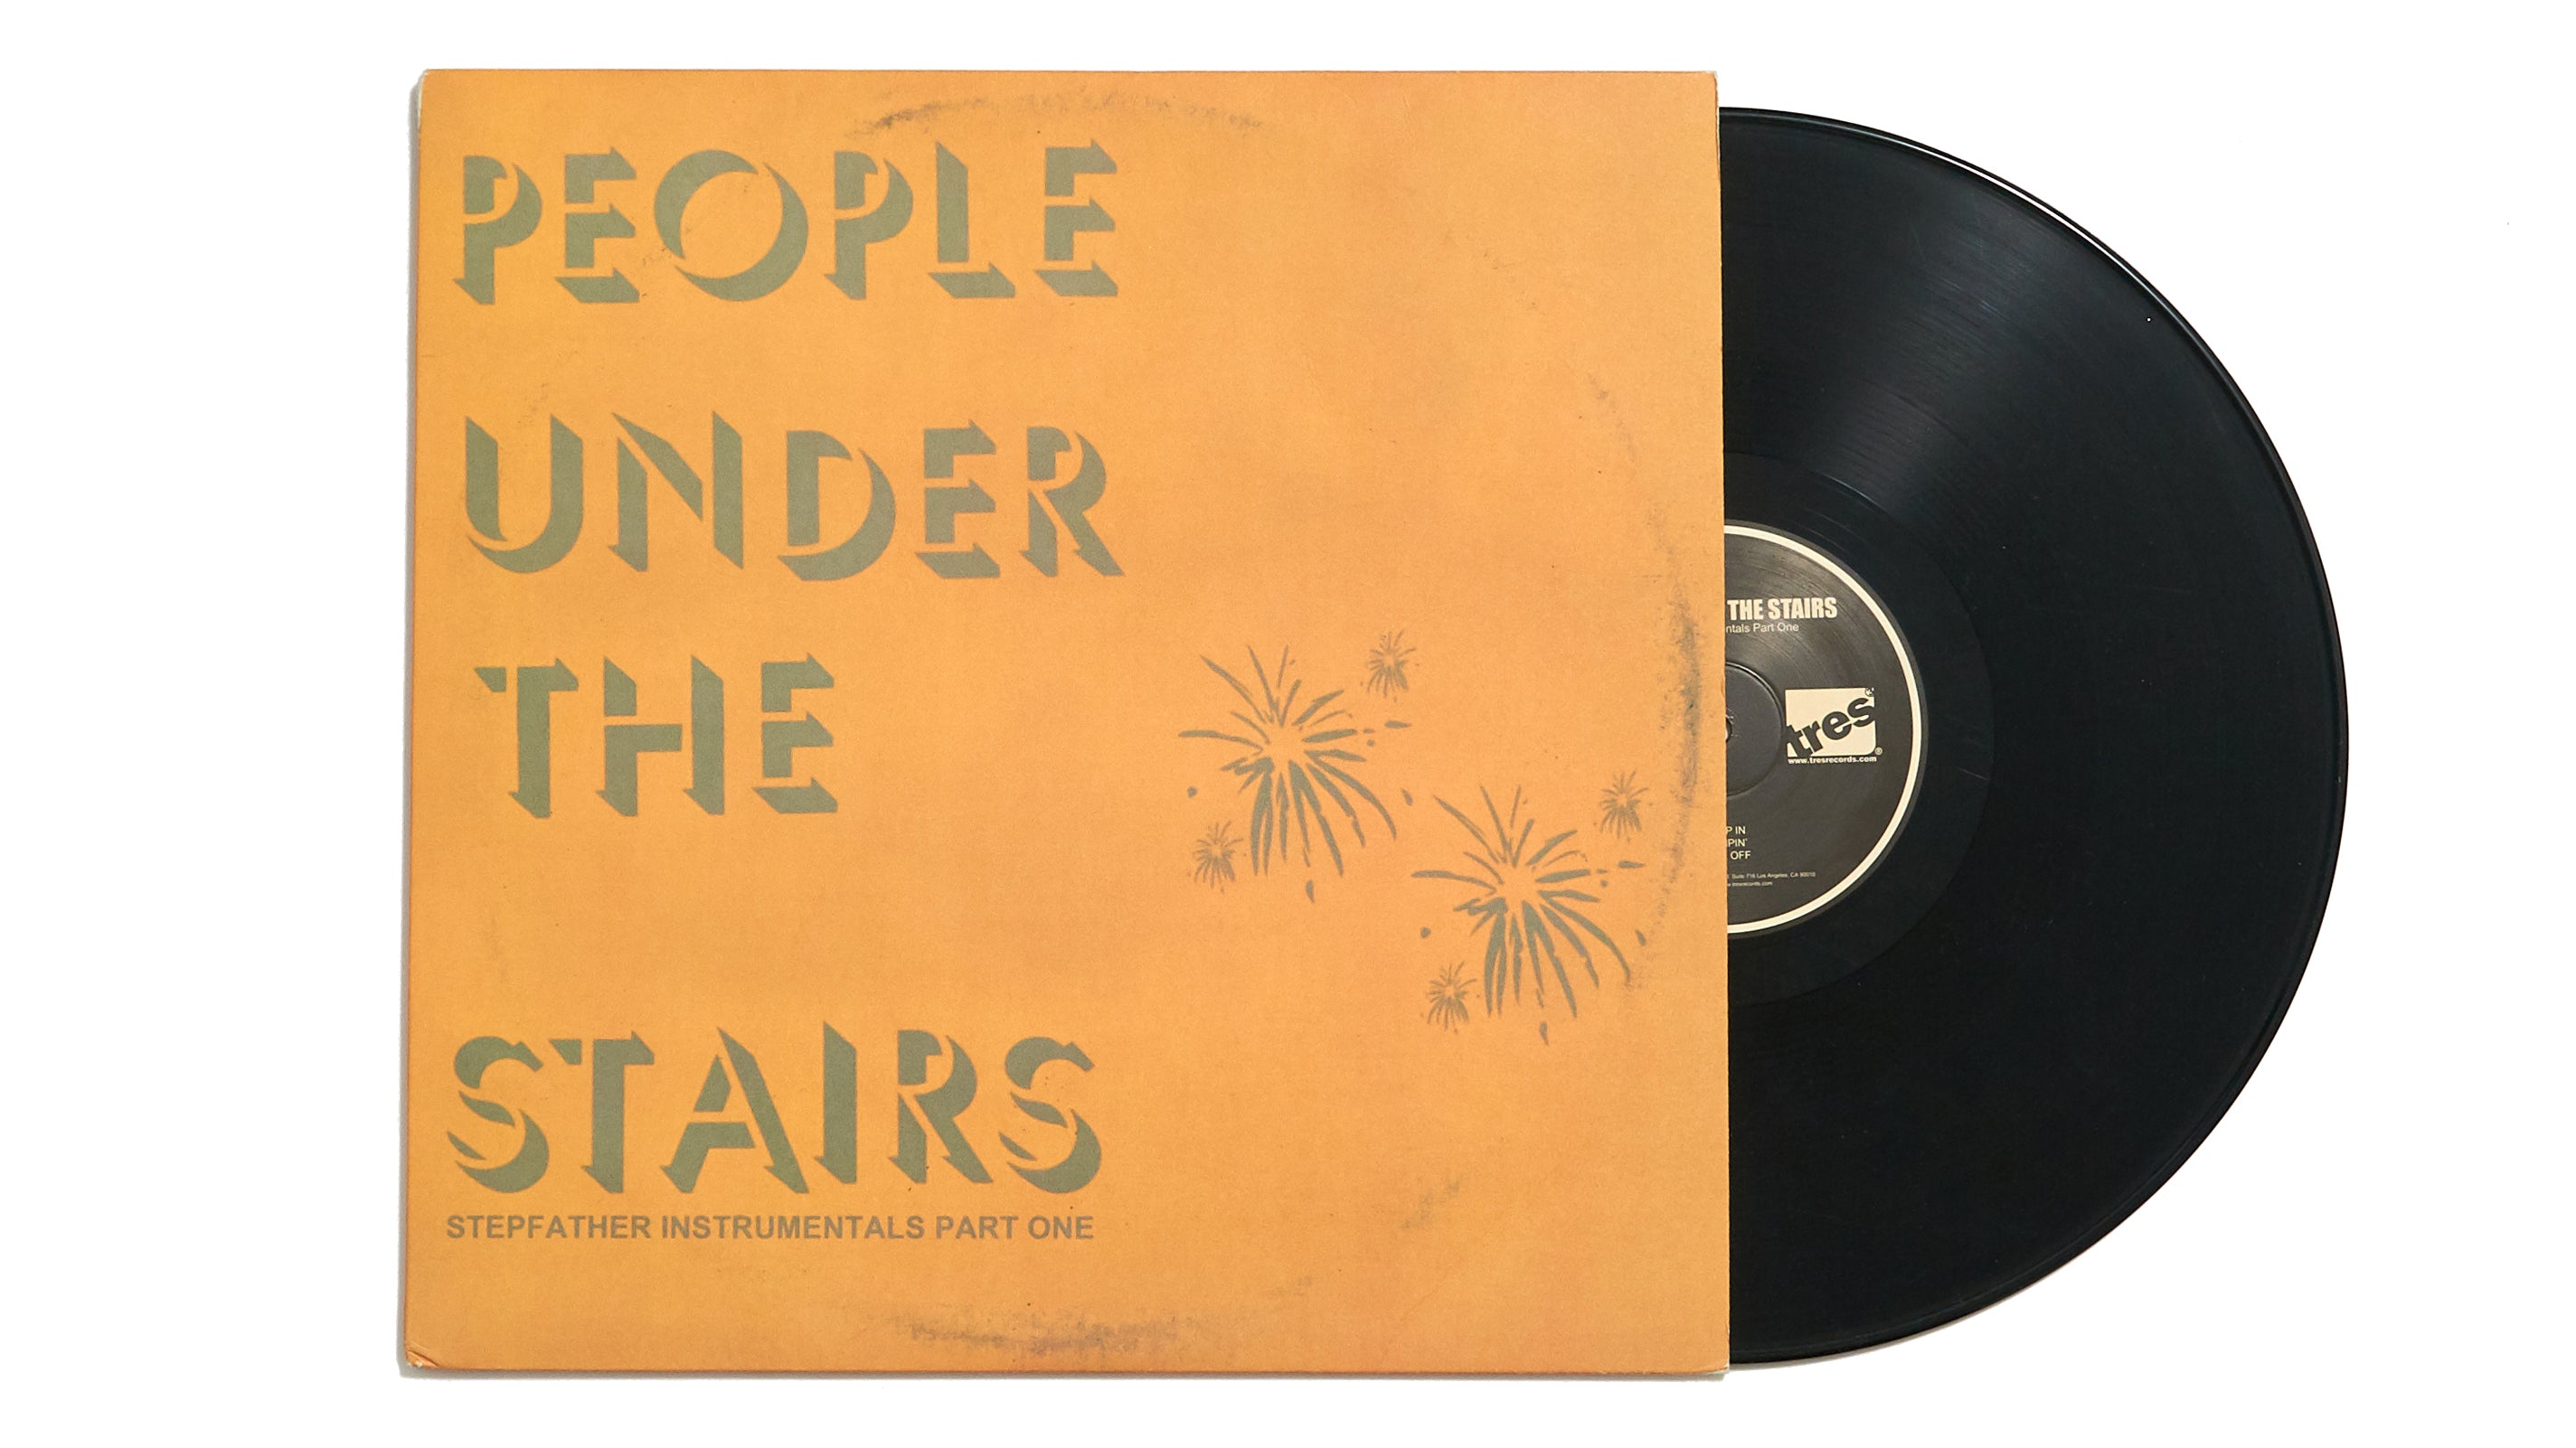 People Under The Stairs "Stepfather Instrumentals Part One" (12")